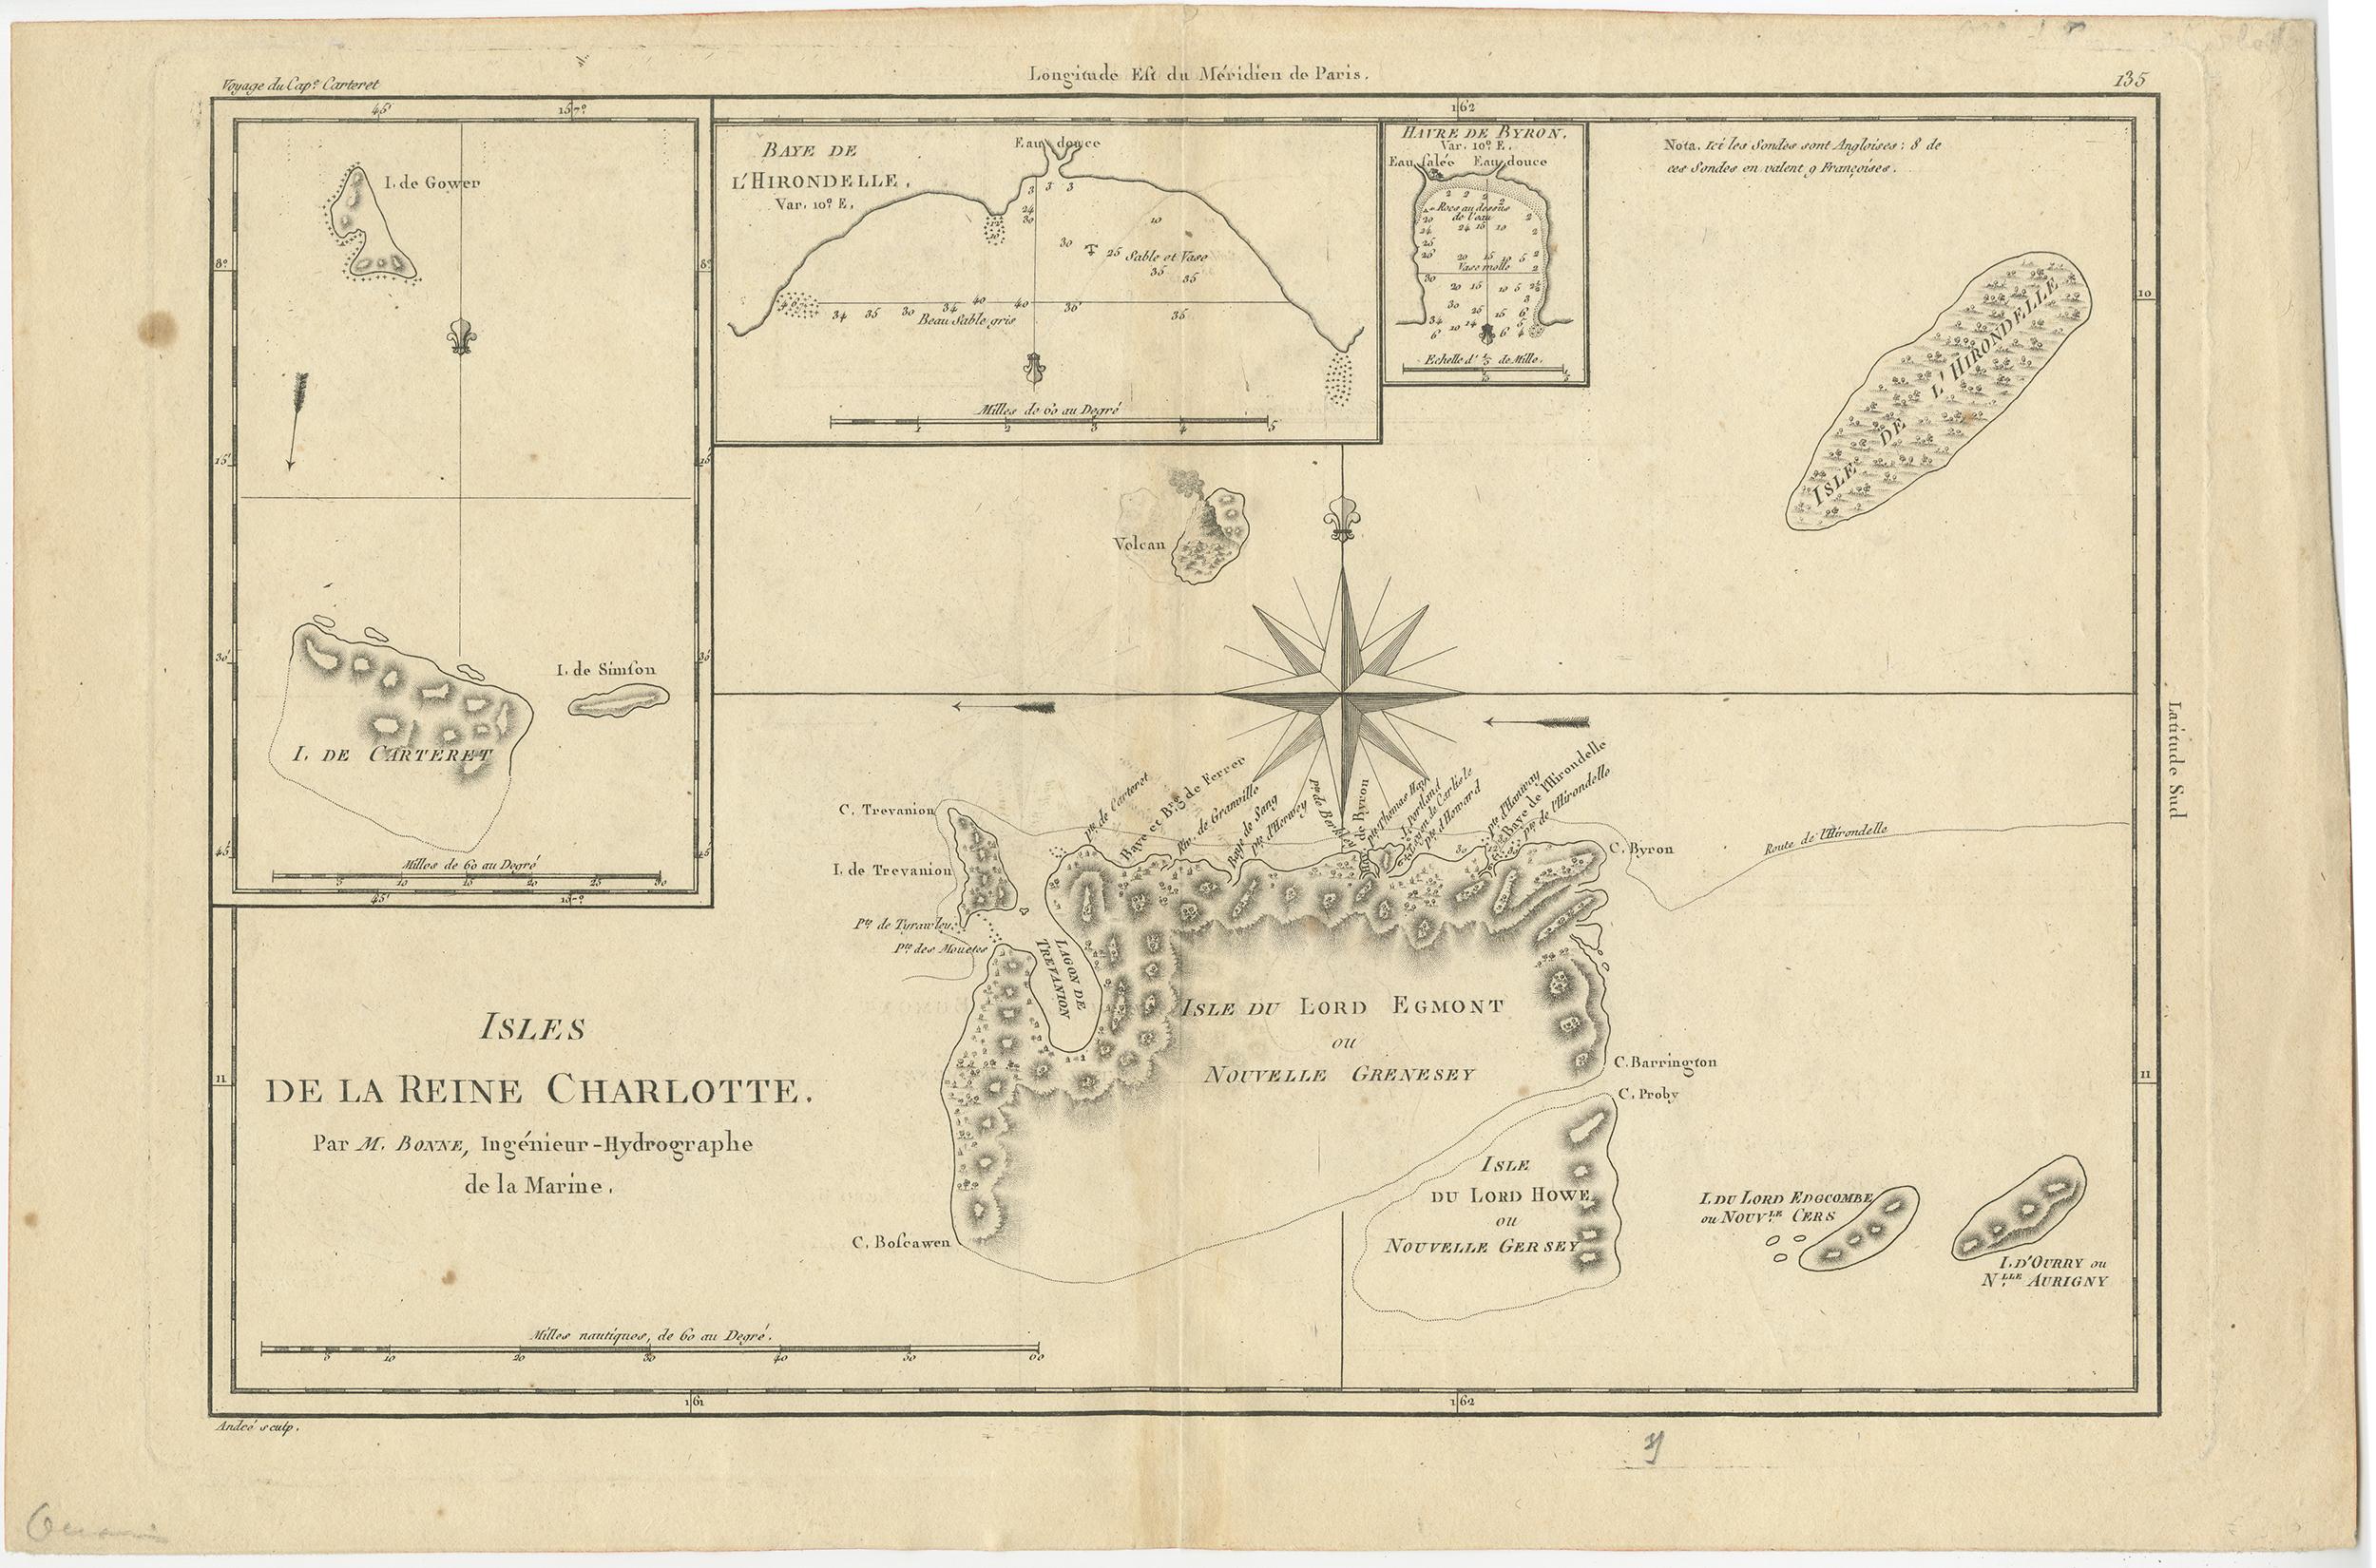 Antique map titled 'Isles de la Reine Charlotte (..)'. Original old map of the Queen Charlotte Islands, based upon the explorations of James Cook, Juan Perez, and other contemporary European explorers. The map shows only partial coastal detail along